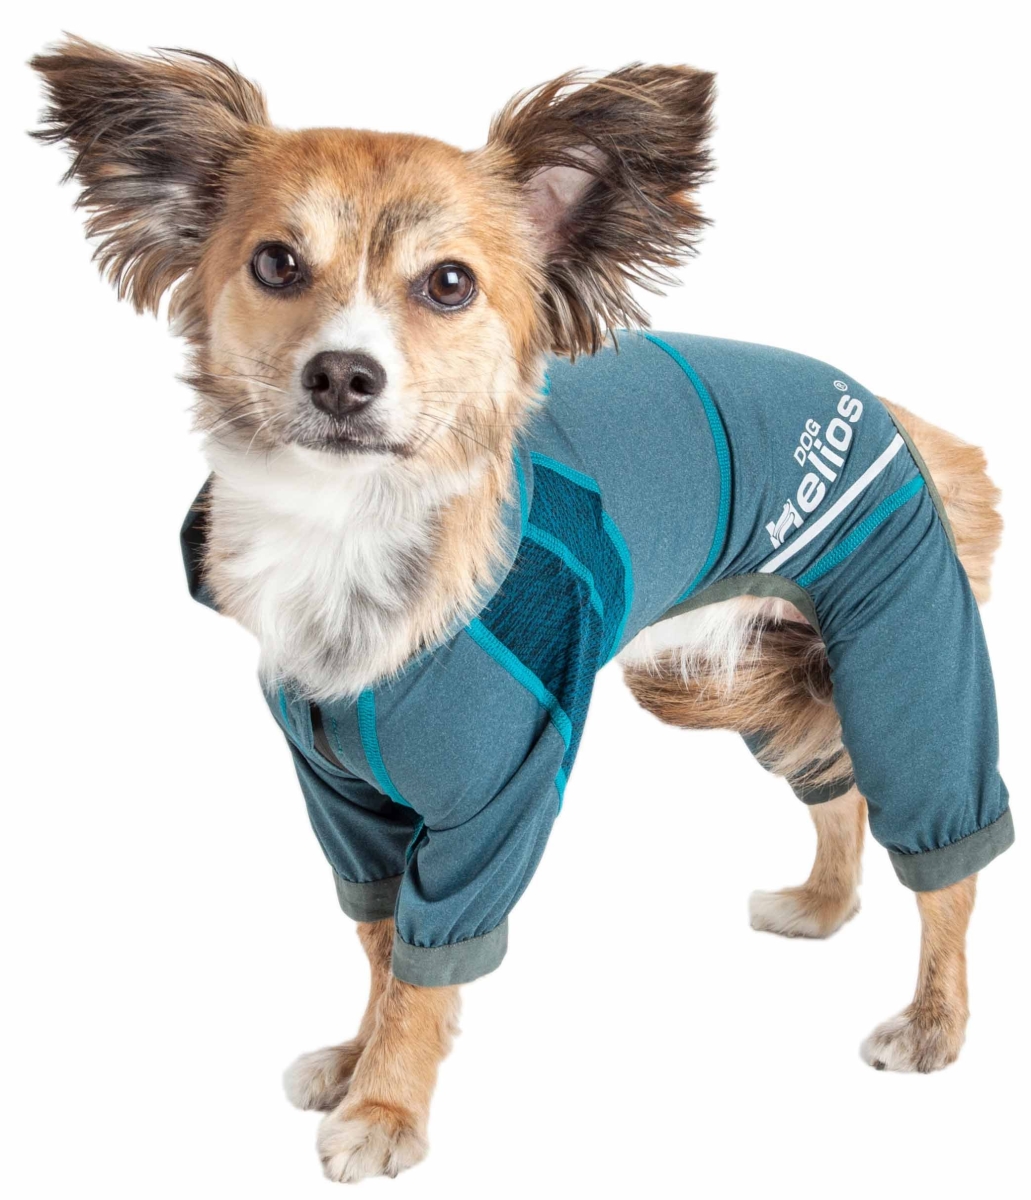 Yghl7tllg Namastail 4-way Stretch Breathable Full Bodied Performance Yoga Dog Hoodie Tracksuit - Teal & Blue, Large